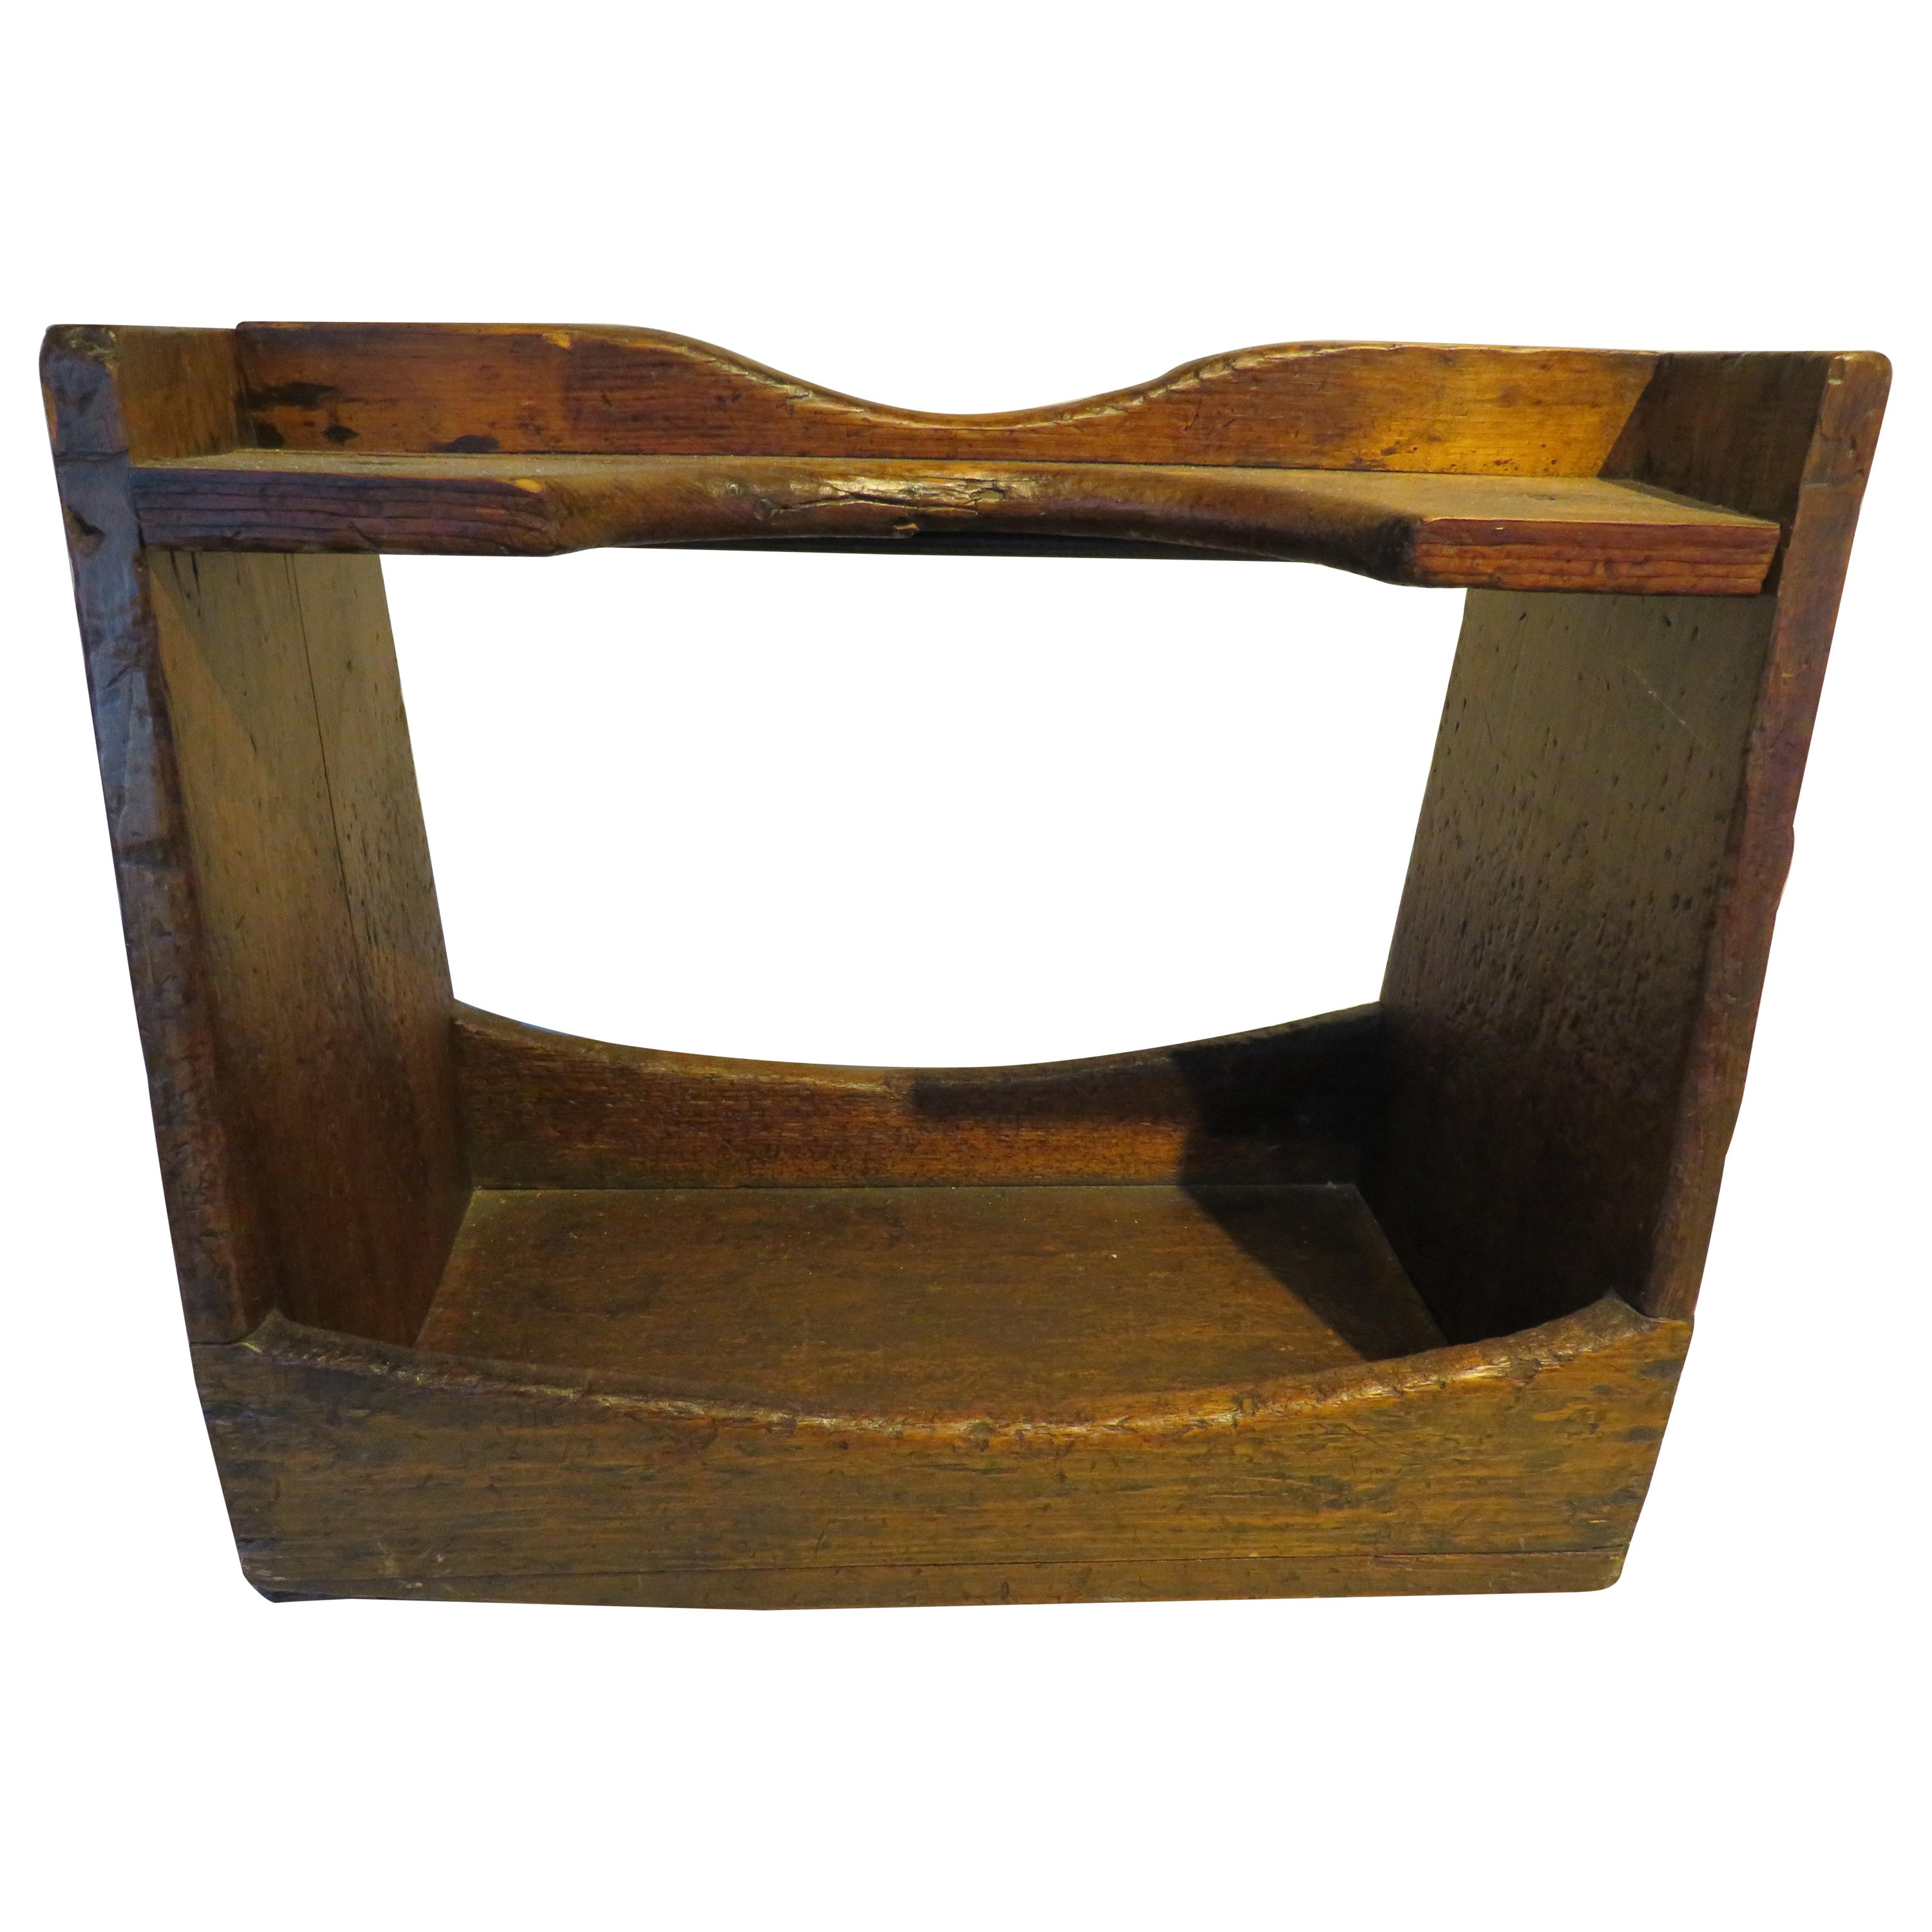 19th Century Pine Farrier's Tray For Sale